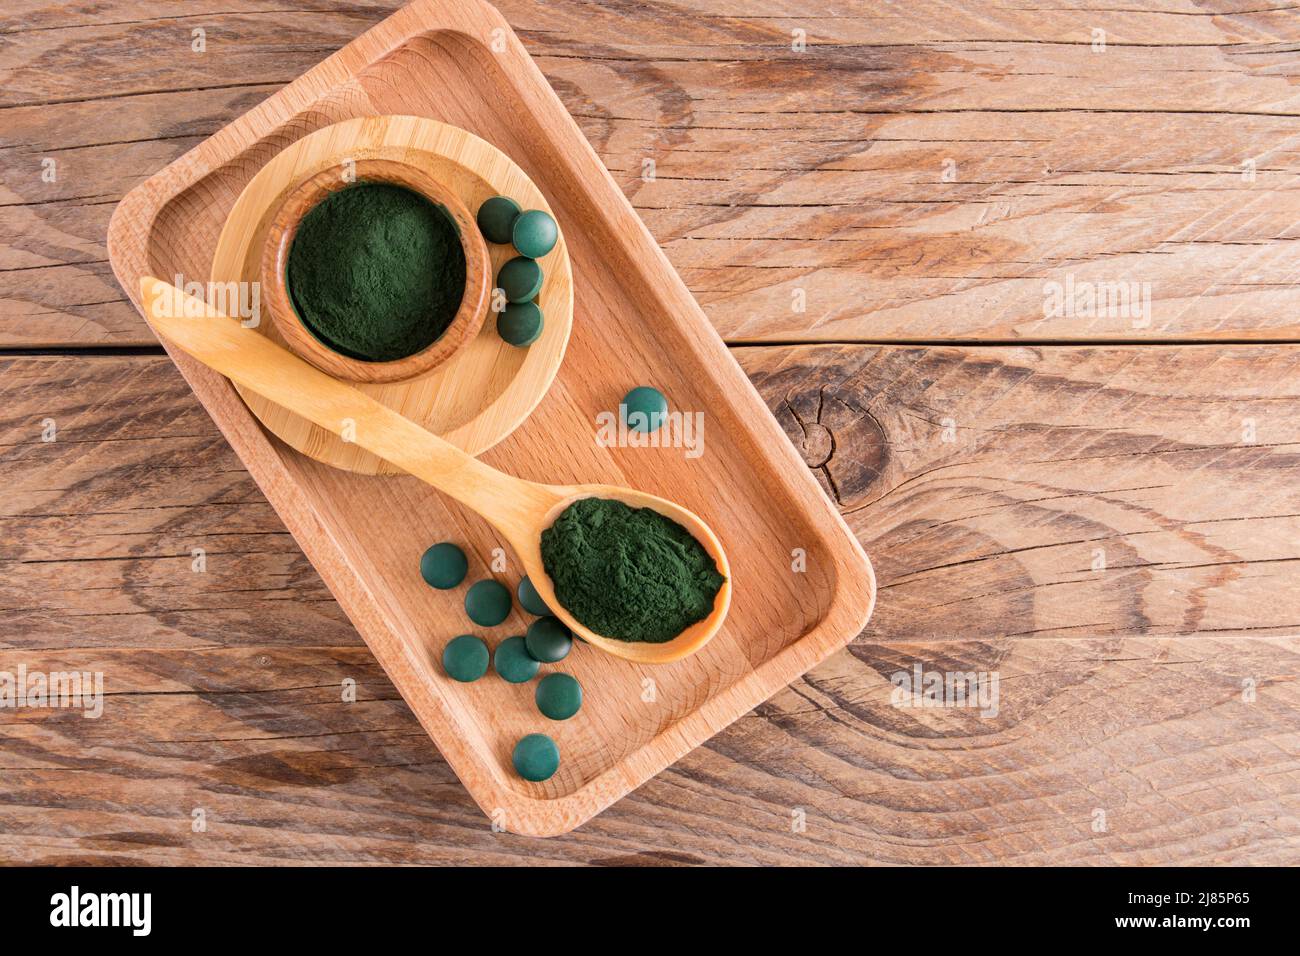 top view of the wooden table with environmentally friendly dishes filled with spirulina algae powder and green tablets. food additive Stock Photo